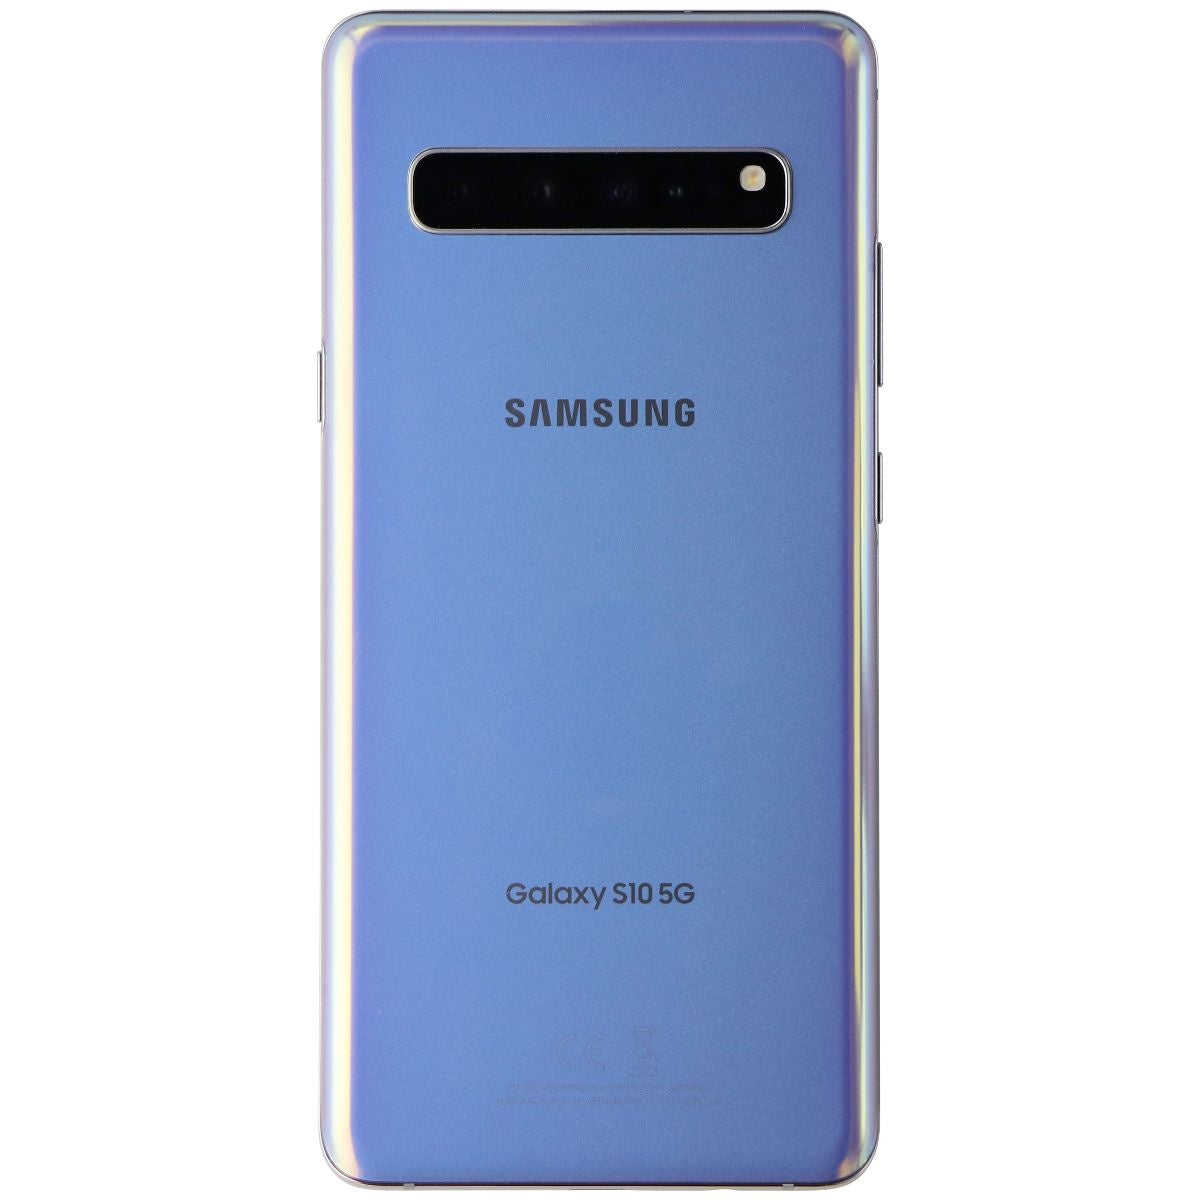 Samsung Galaxy S10 5G Smartphone (SM-G977U) Verizon Only - 512GB/Crown Silver Cell Phones & Smartphones Samsung    - Simple Cell Bulk Wholesale Pricing - USA Seller